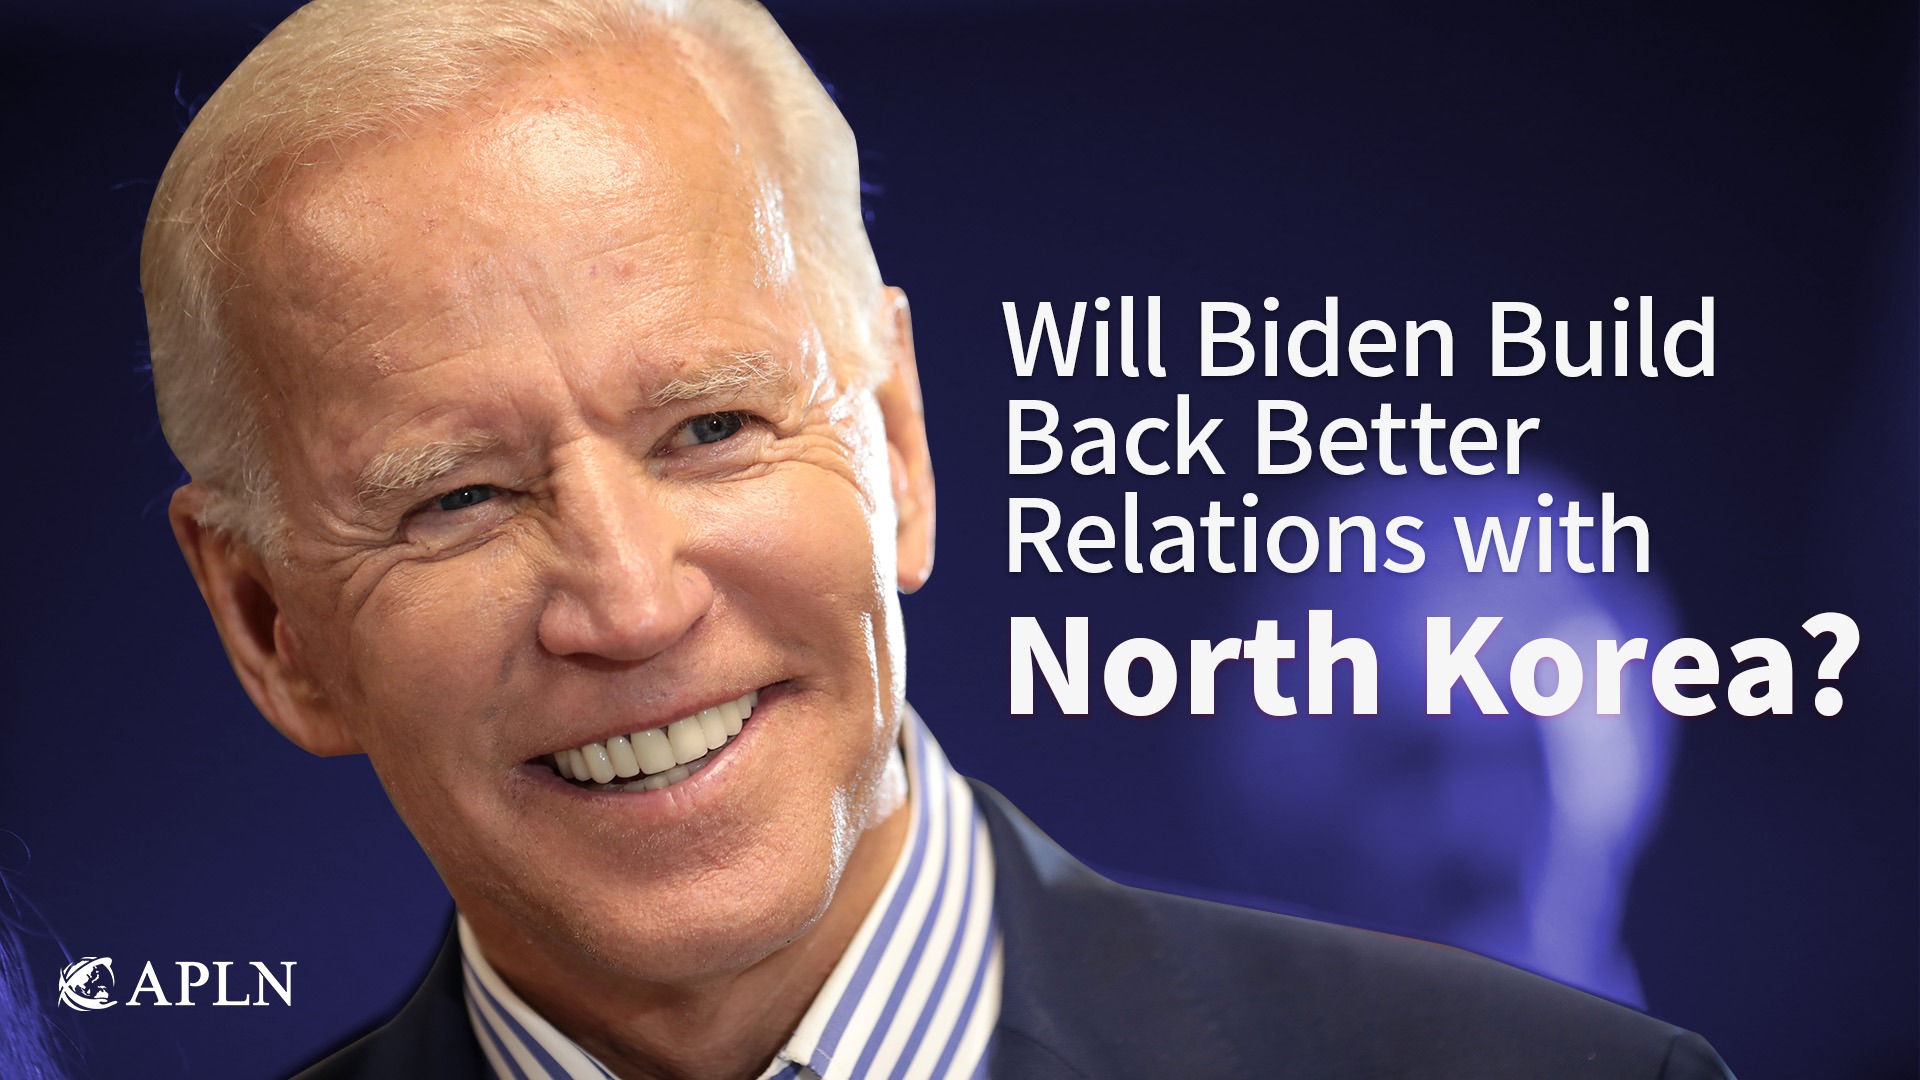 Will Biden "Build Back Better" Relations with North Korea?